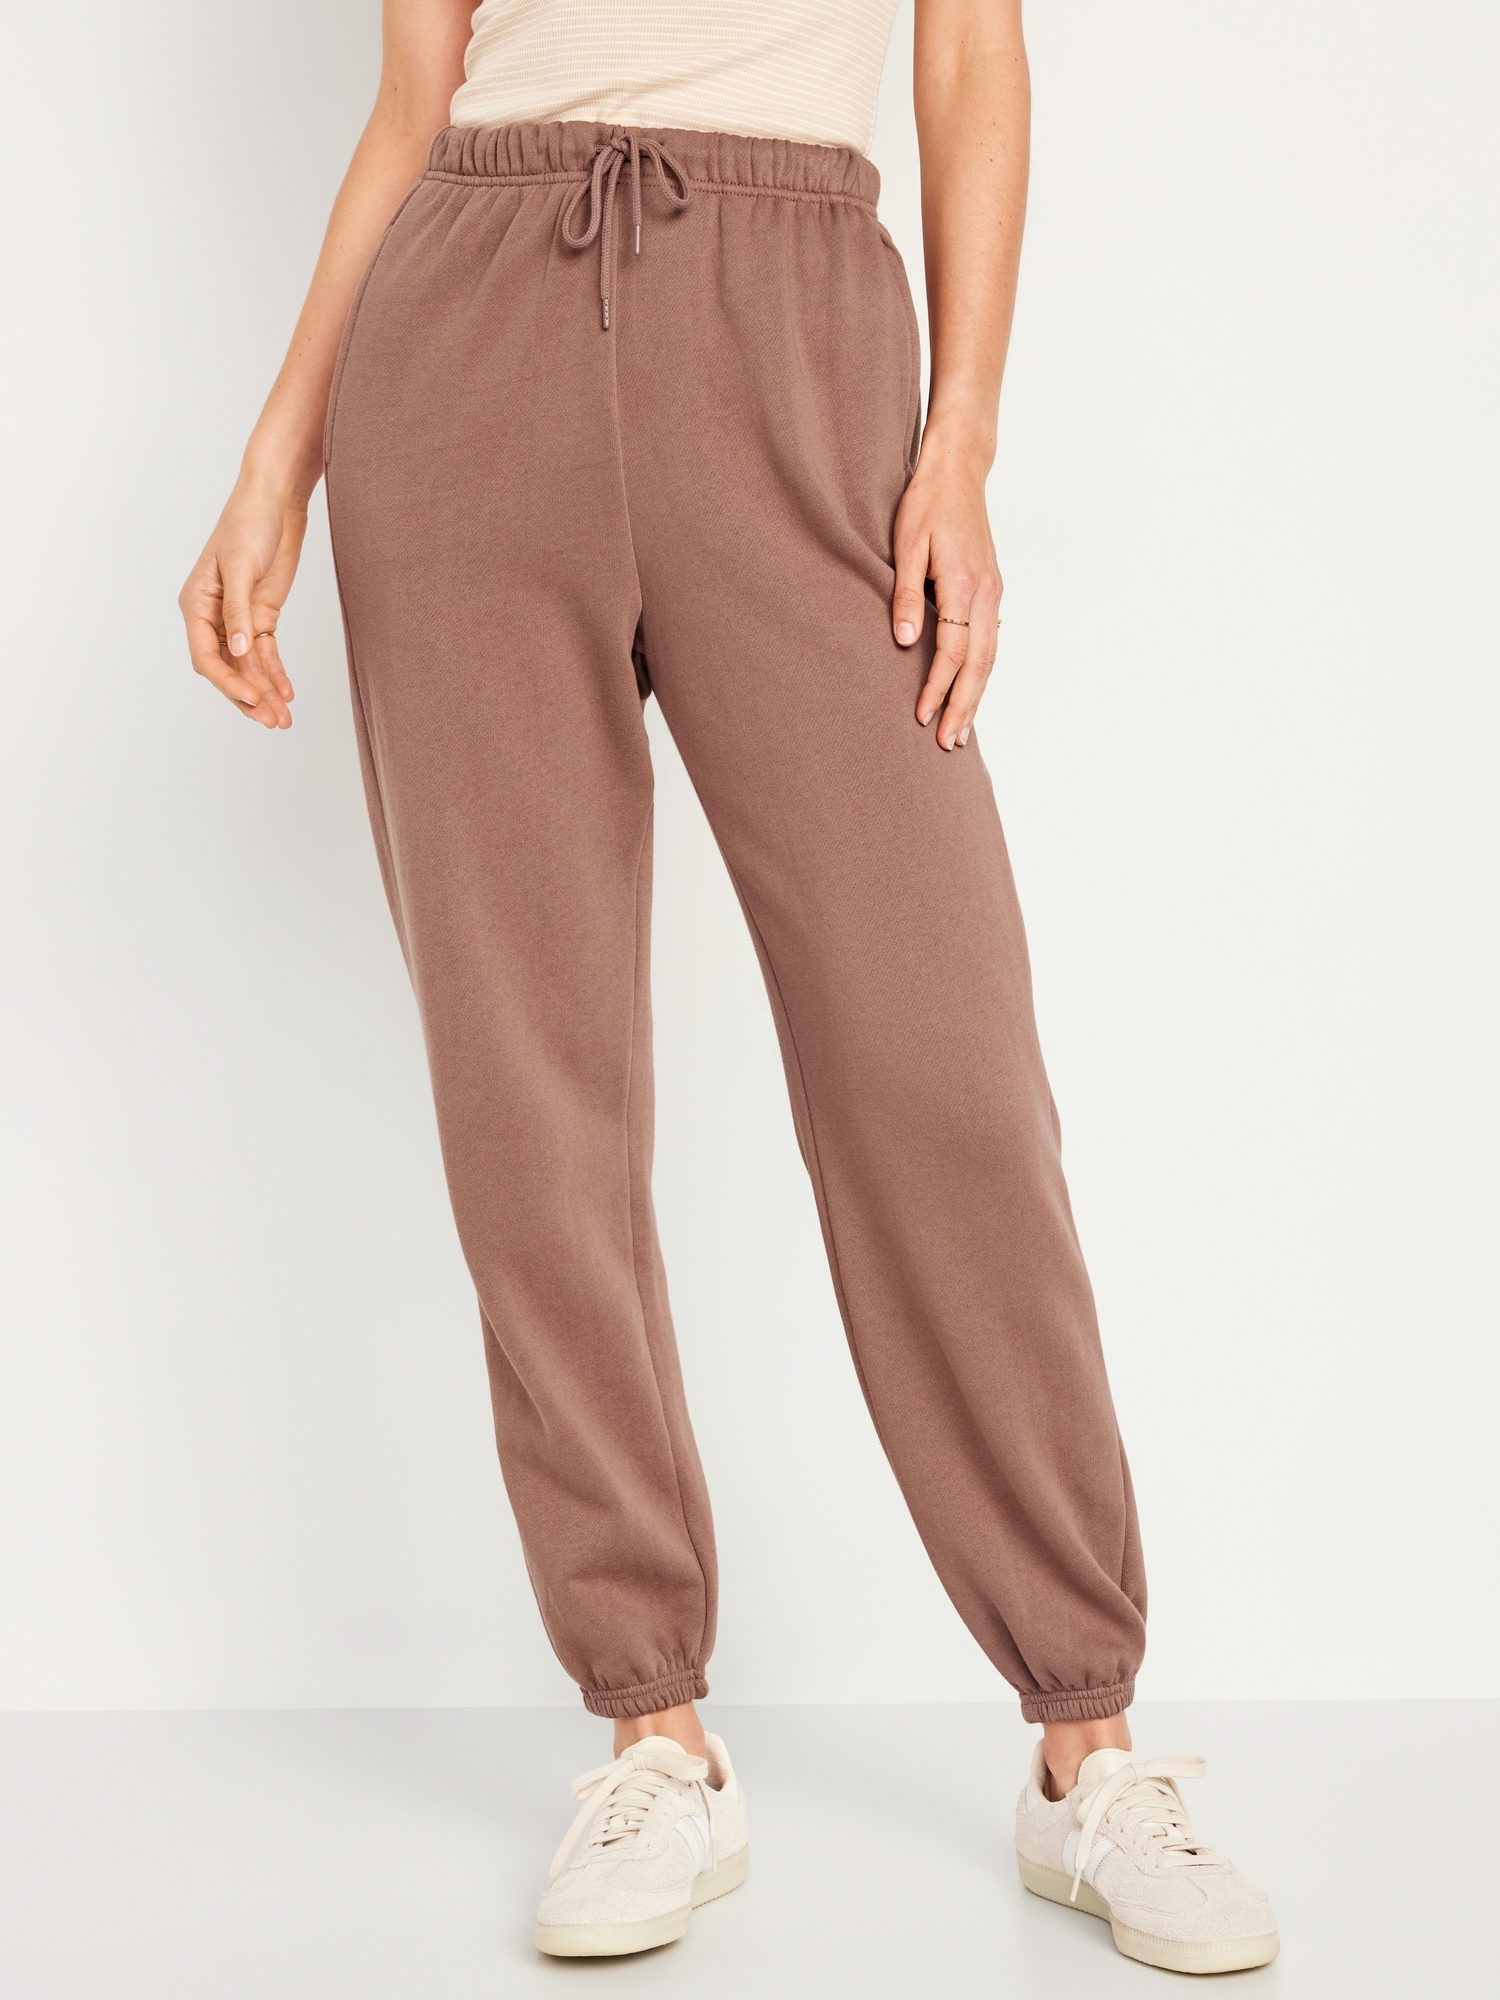 High-Waisted Garment-Dyed Street Jogger Pants for Women, Old Navy